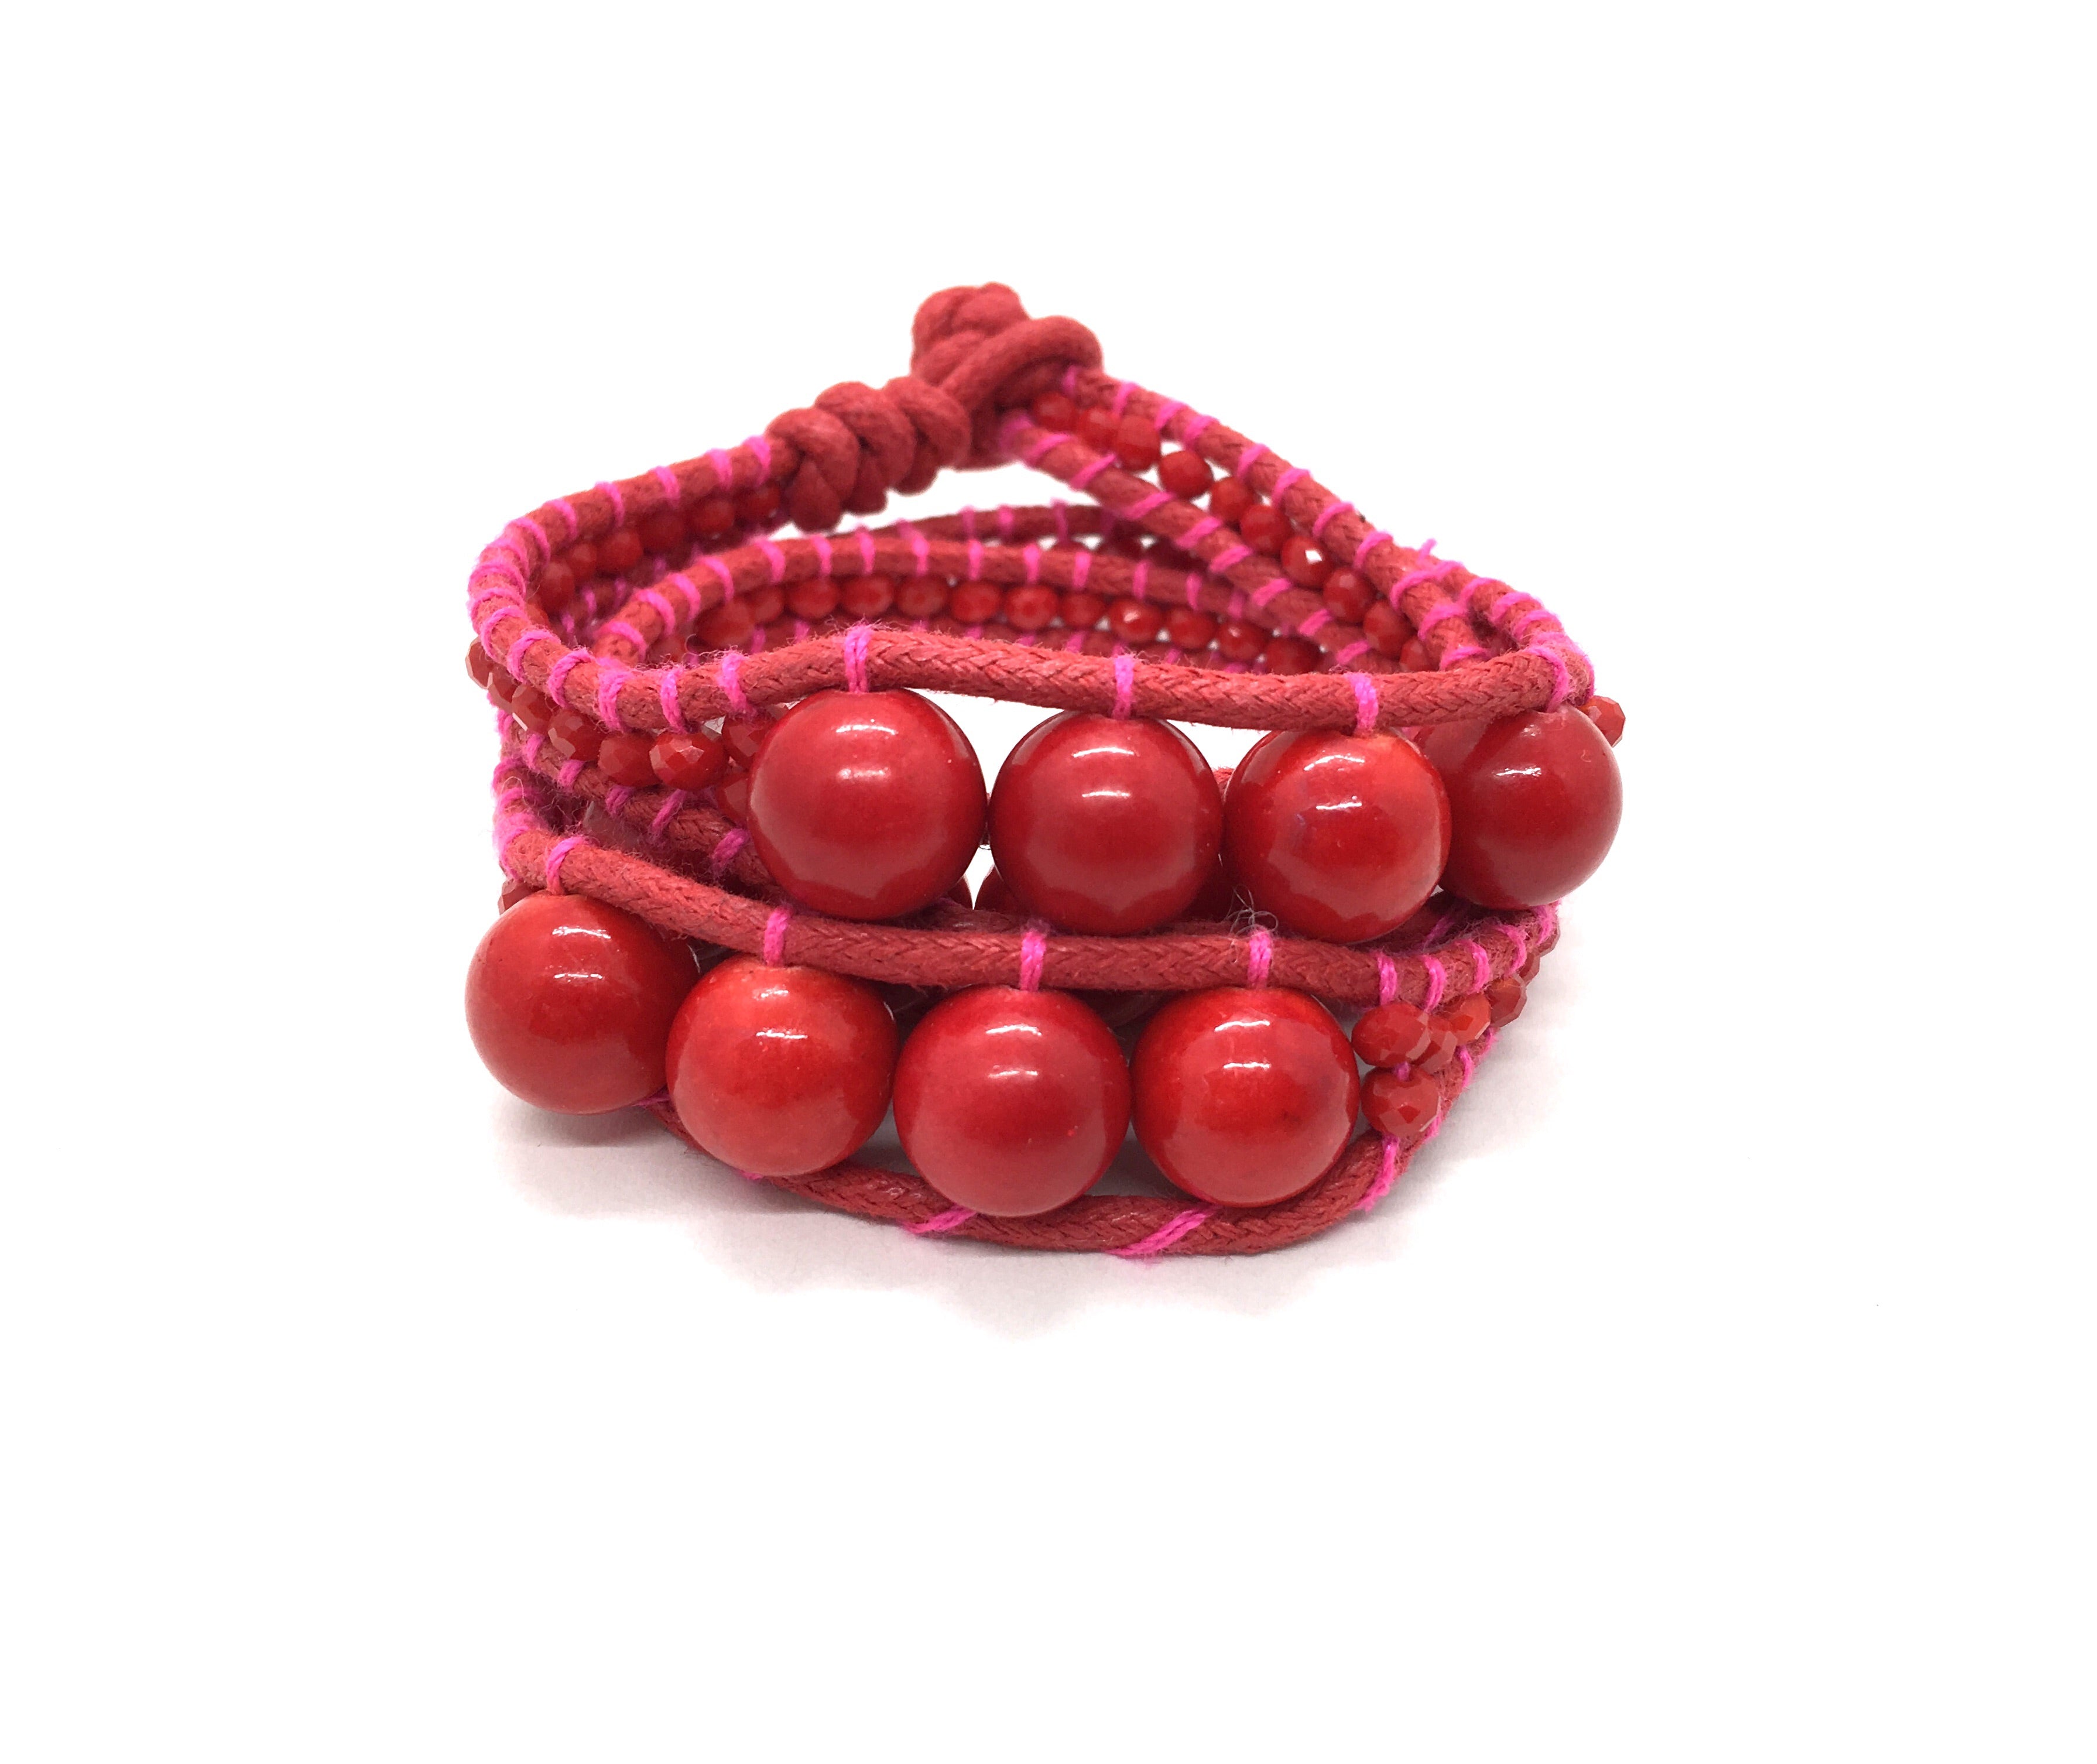 I love Syria - Triple Wrap around - big red stone - red cord - pink thread